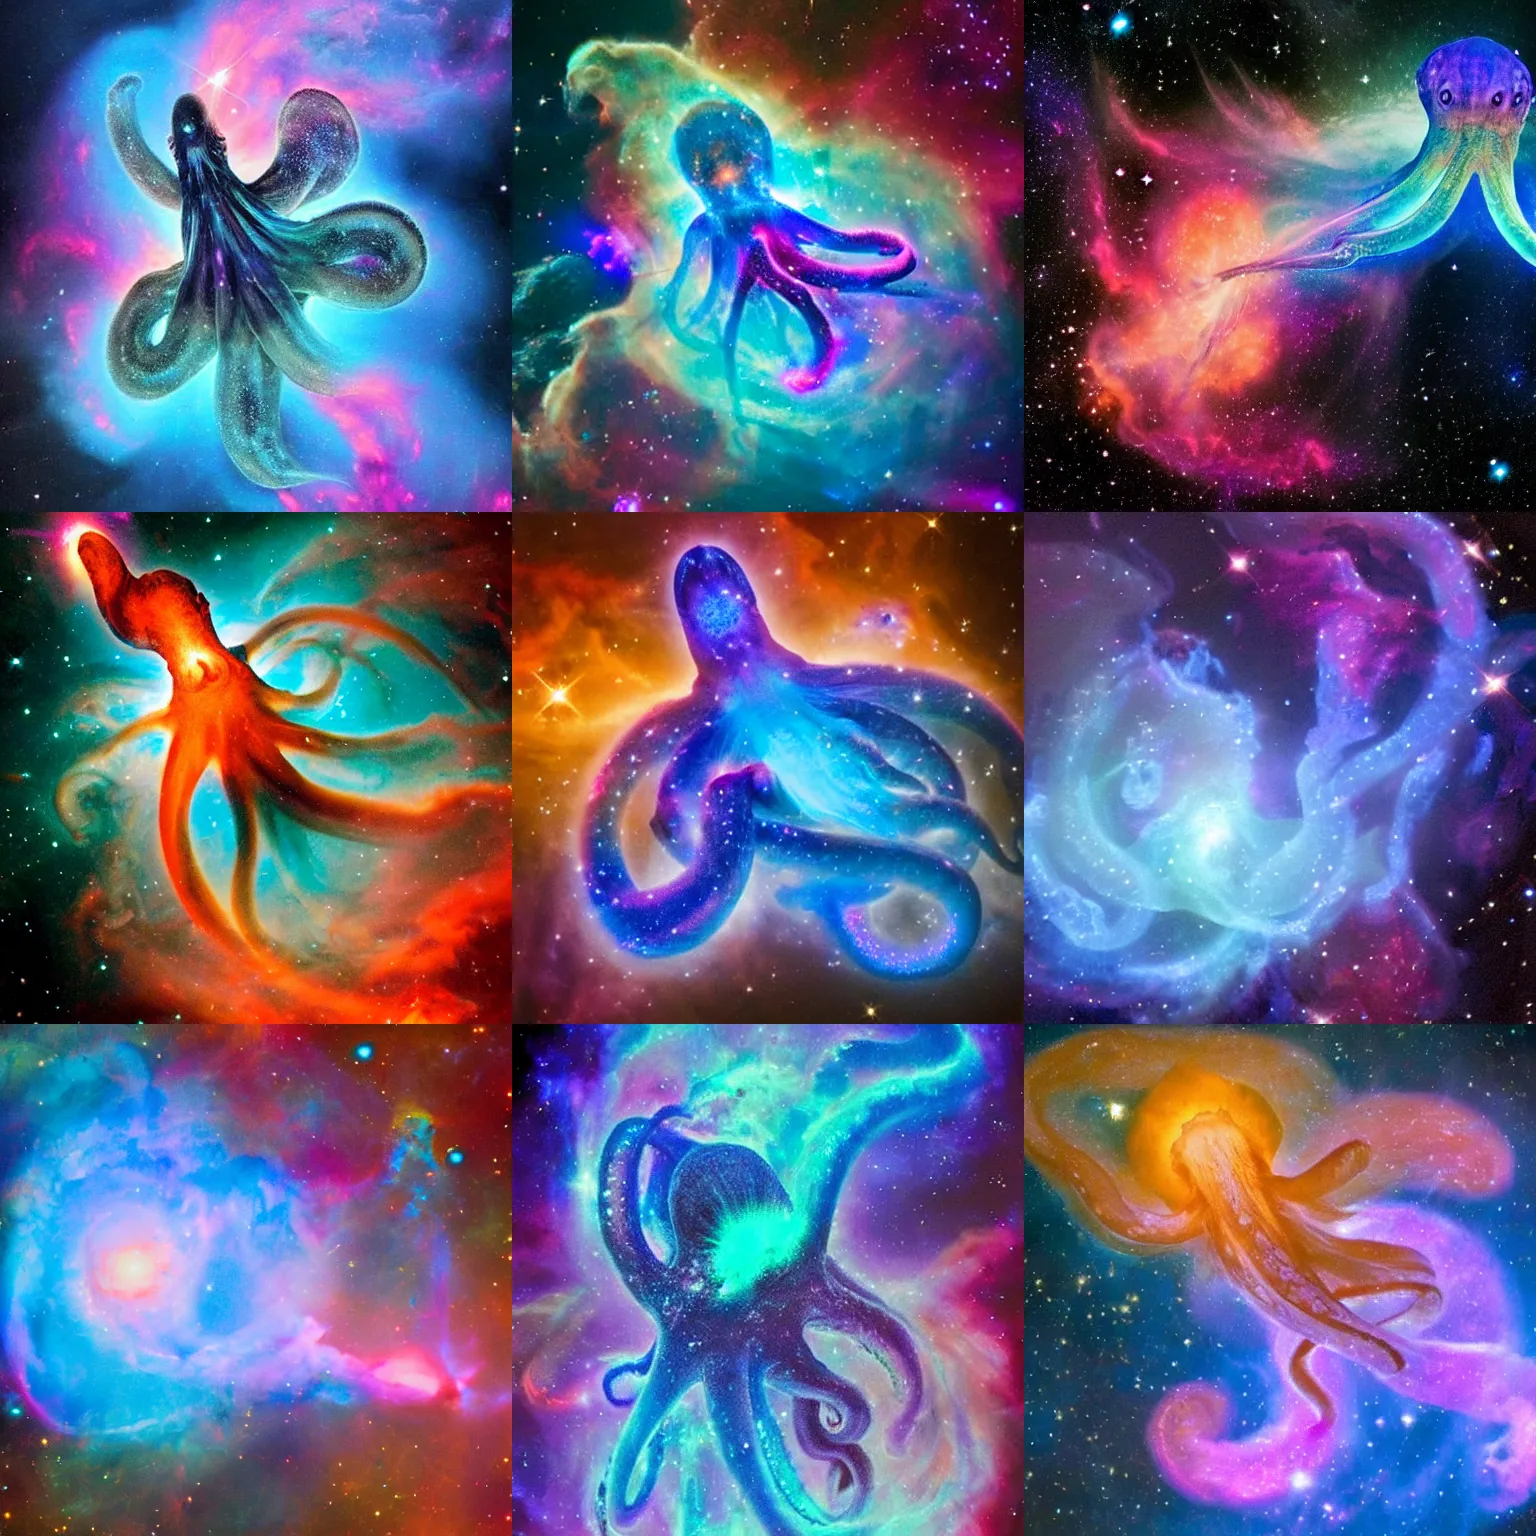 Prompt: a giant glowing blue octopus is swimming through the beautiful nebula in space.